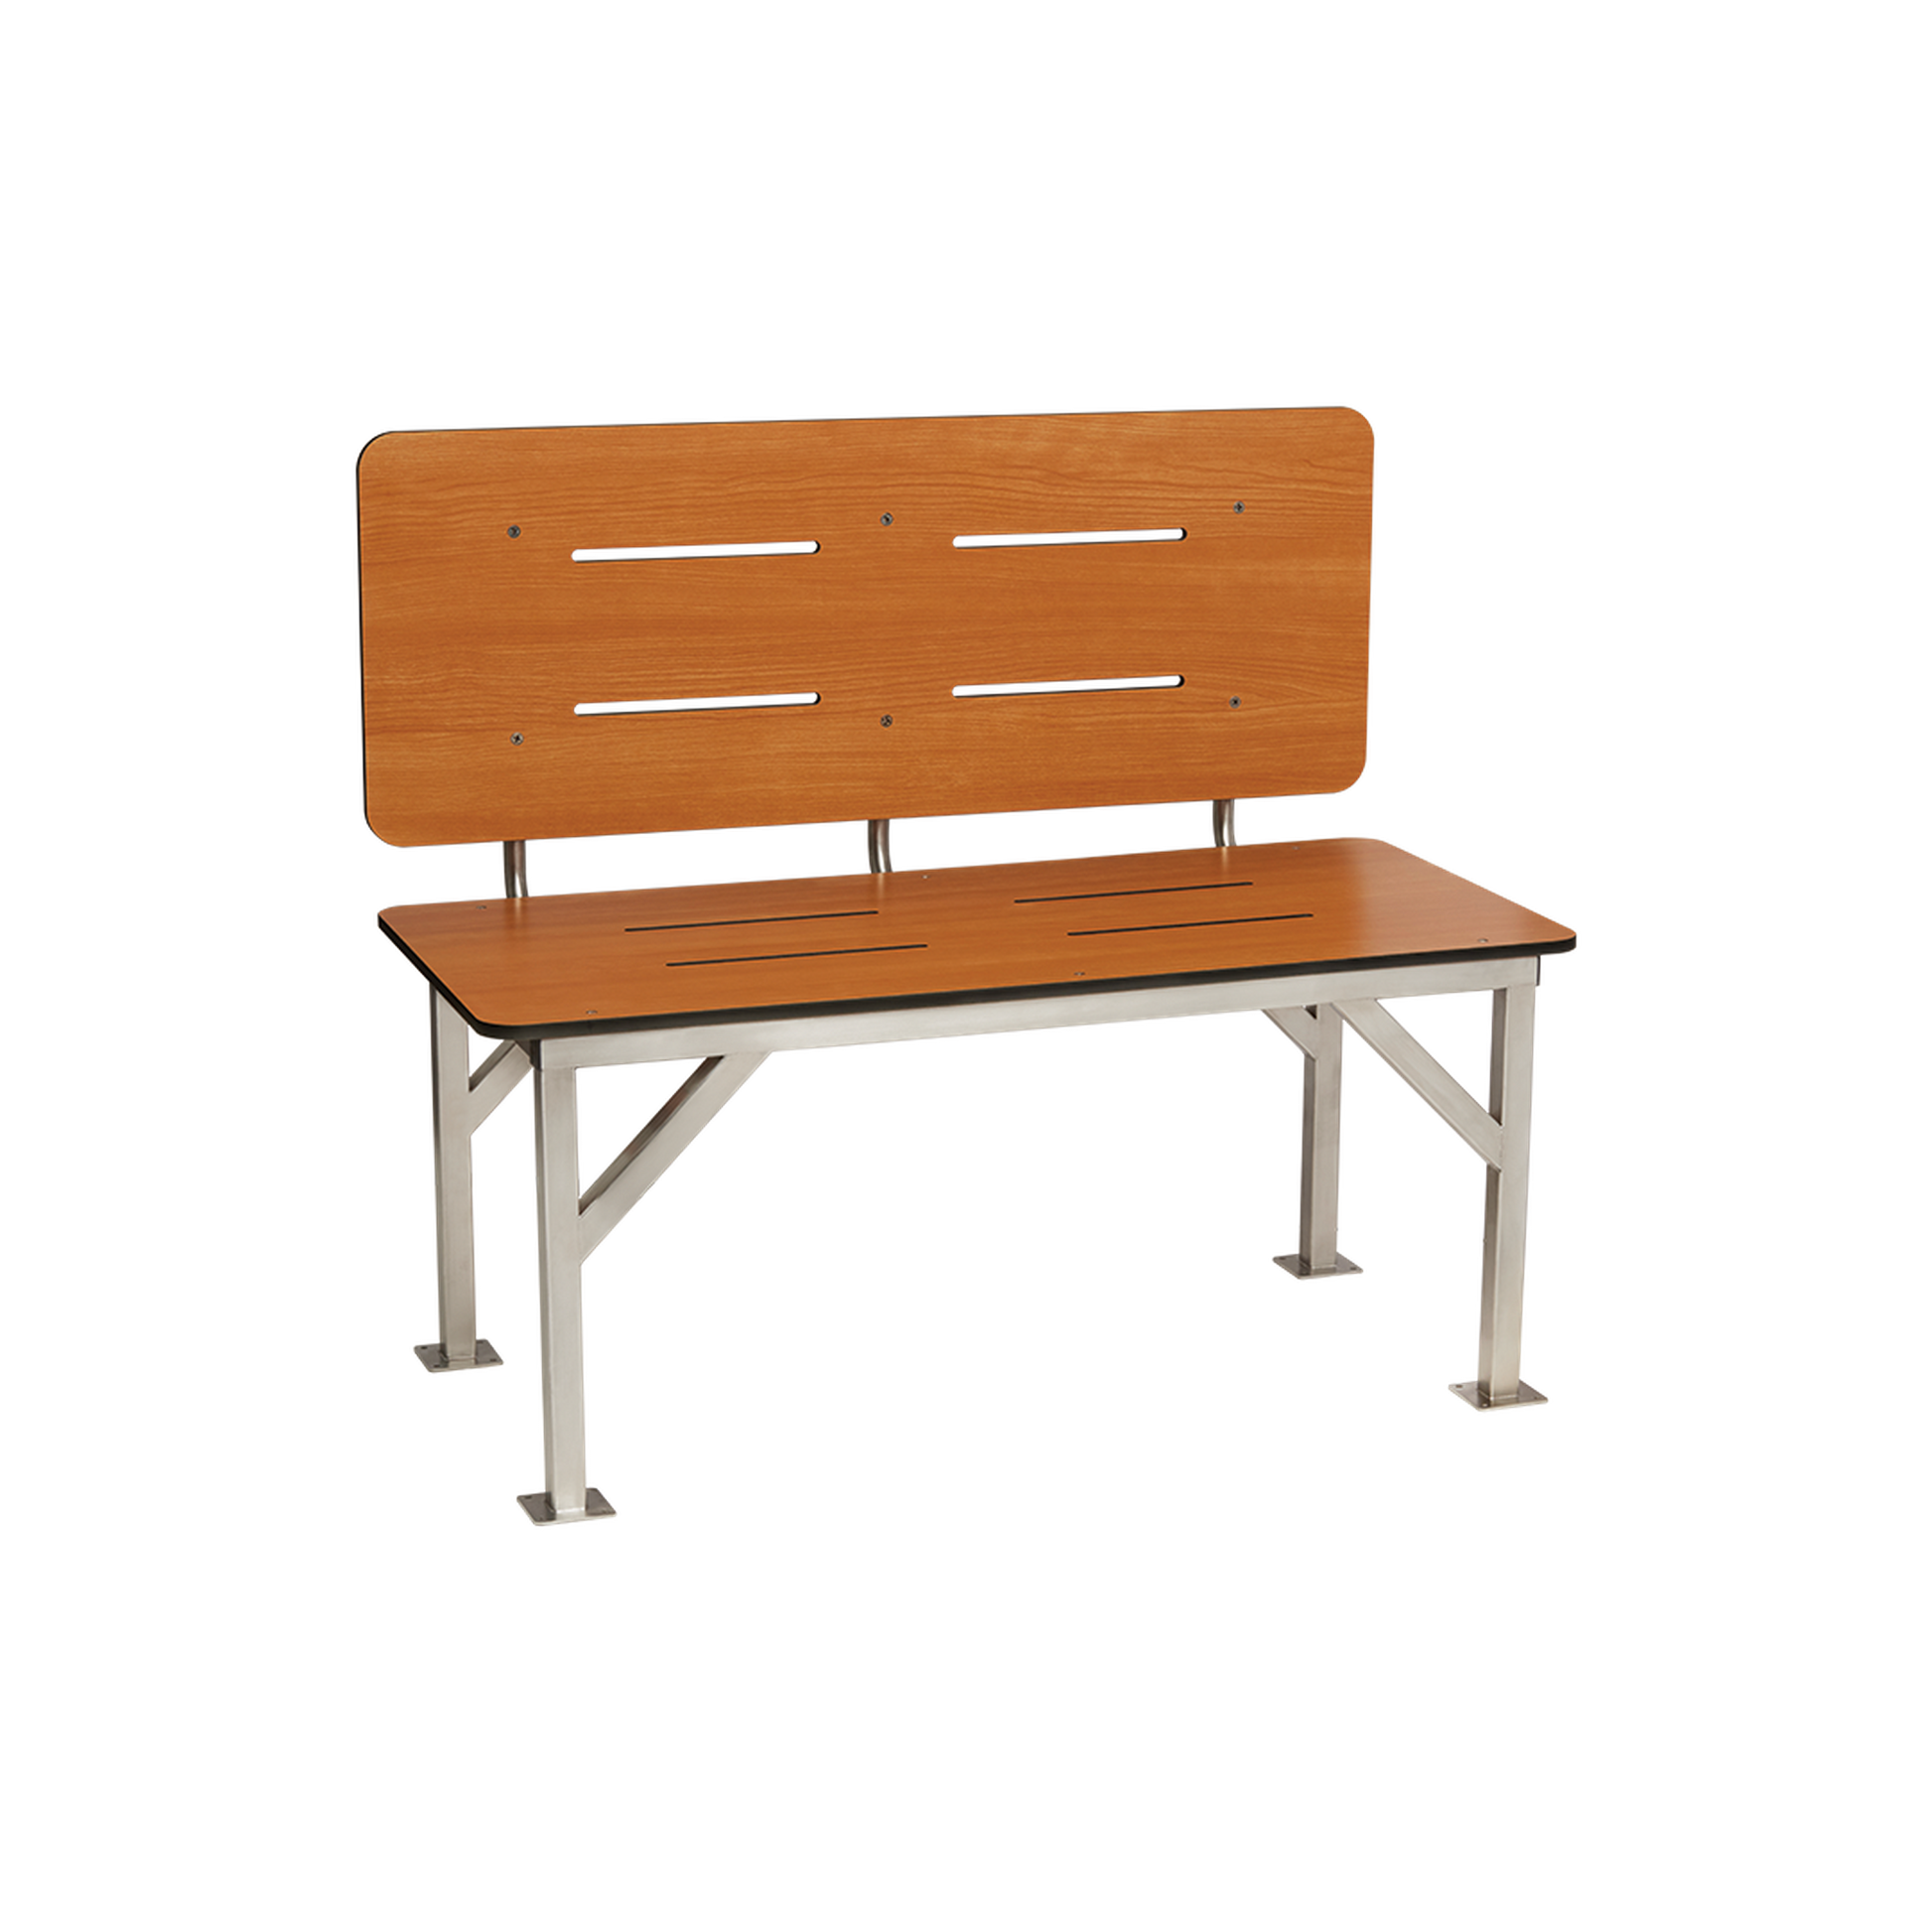 Seachrome Signature Series 48" W x 24" D Teak One-Piece Solid Phenolic Stationary Bench Seat With Backrest